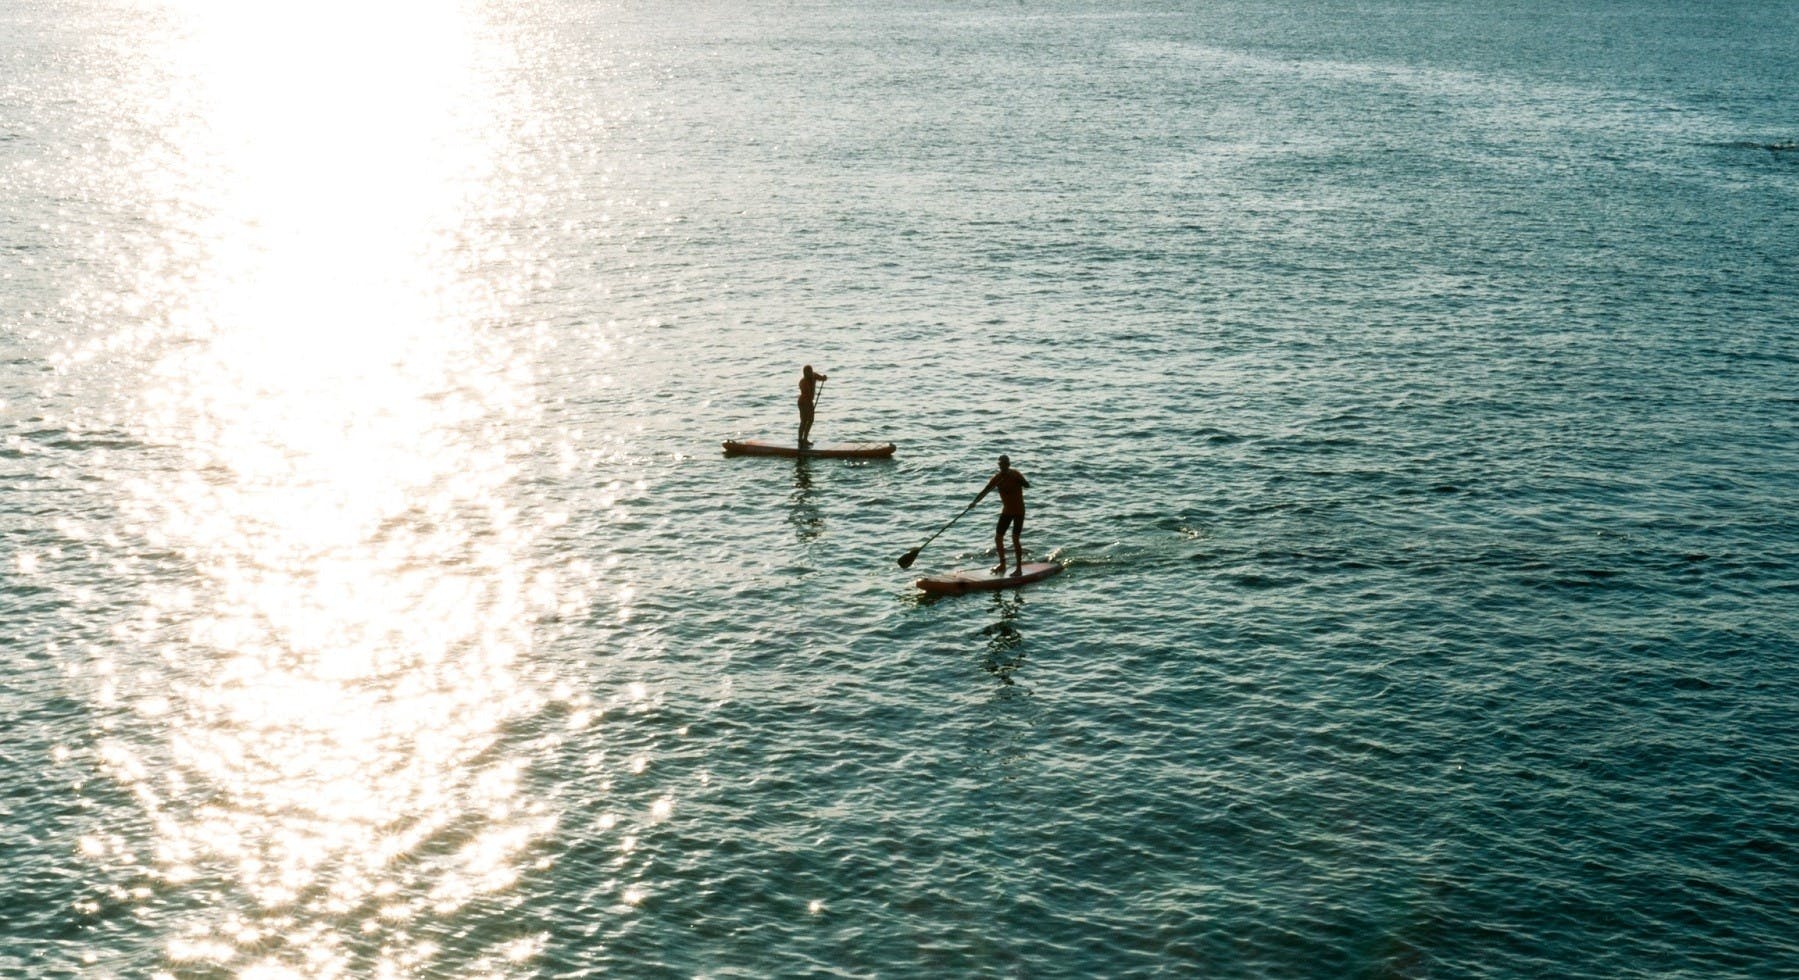 Paddleboard-voorproefje en rondleiding in Newquay